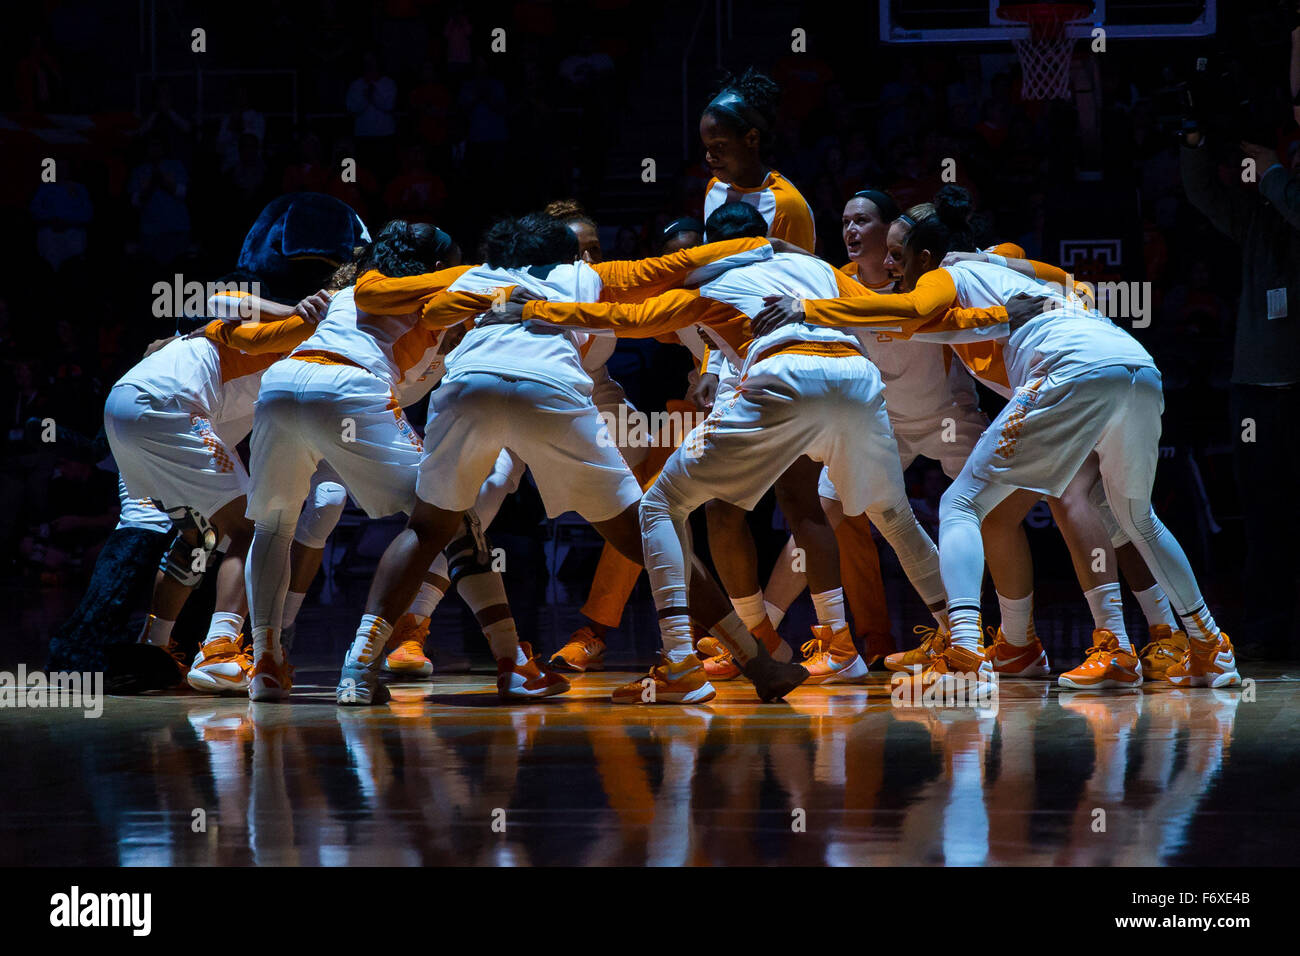 November 20, 2015: Tennessee Lady Volunteers players get ready before the NCAA basketball game between the University of Tennessee Lady Volunteers and the Syracuse University Orange at Thompson Boling Arena in Knoxville TN Tim Gangloff/CSM Stock Photo